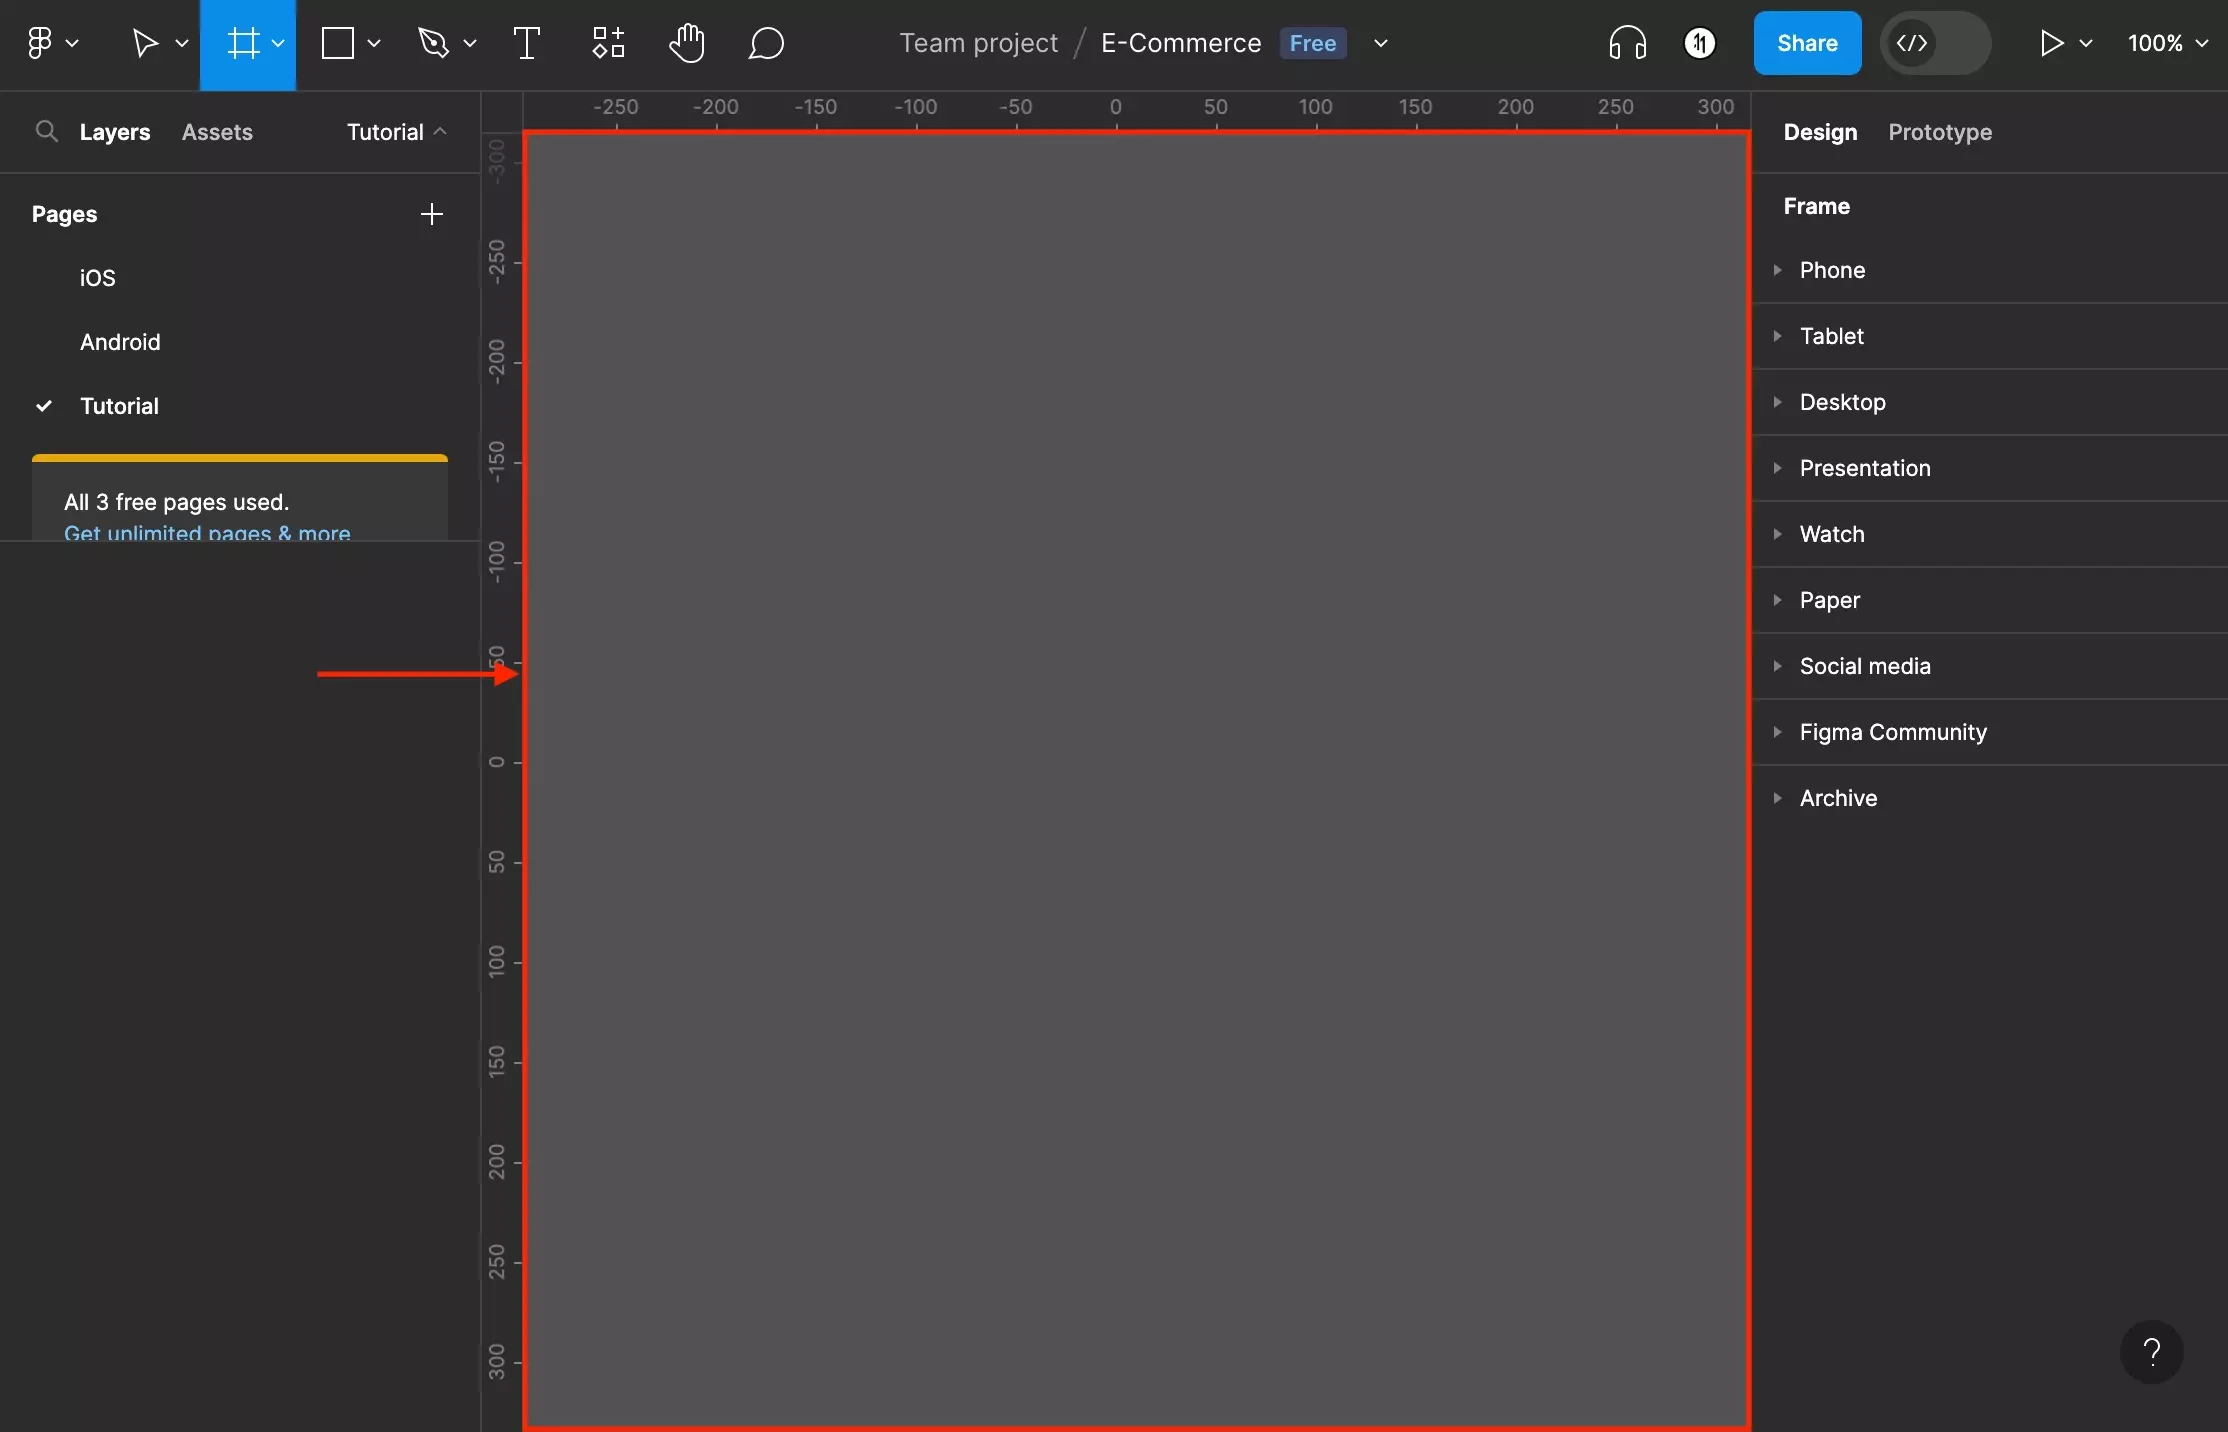 A screenshot of Figma that shows you the area of the Figma canvas. If the Frame tool is selected you can create a new artboard by clicking on the canvas and dragging across it to form a canvas of your own size.